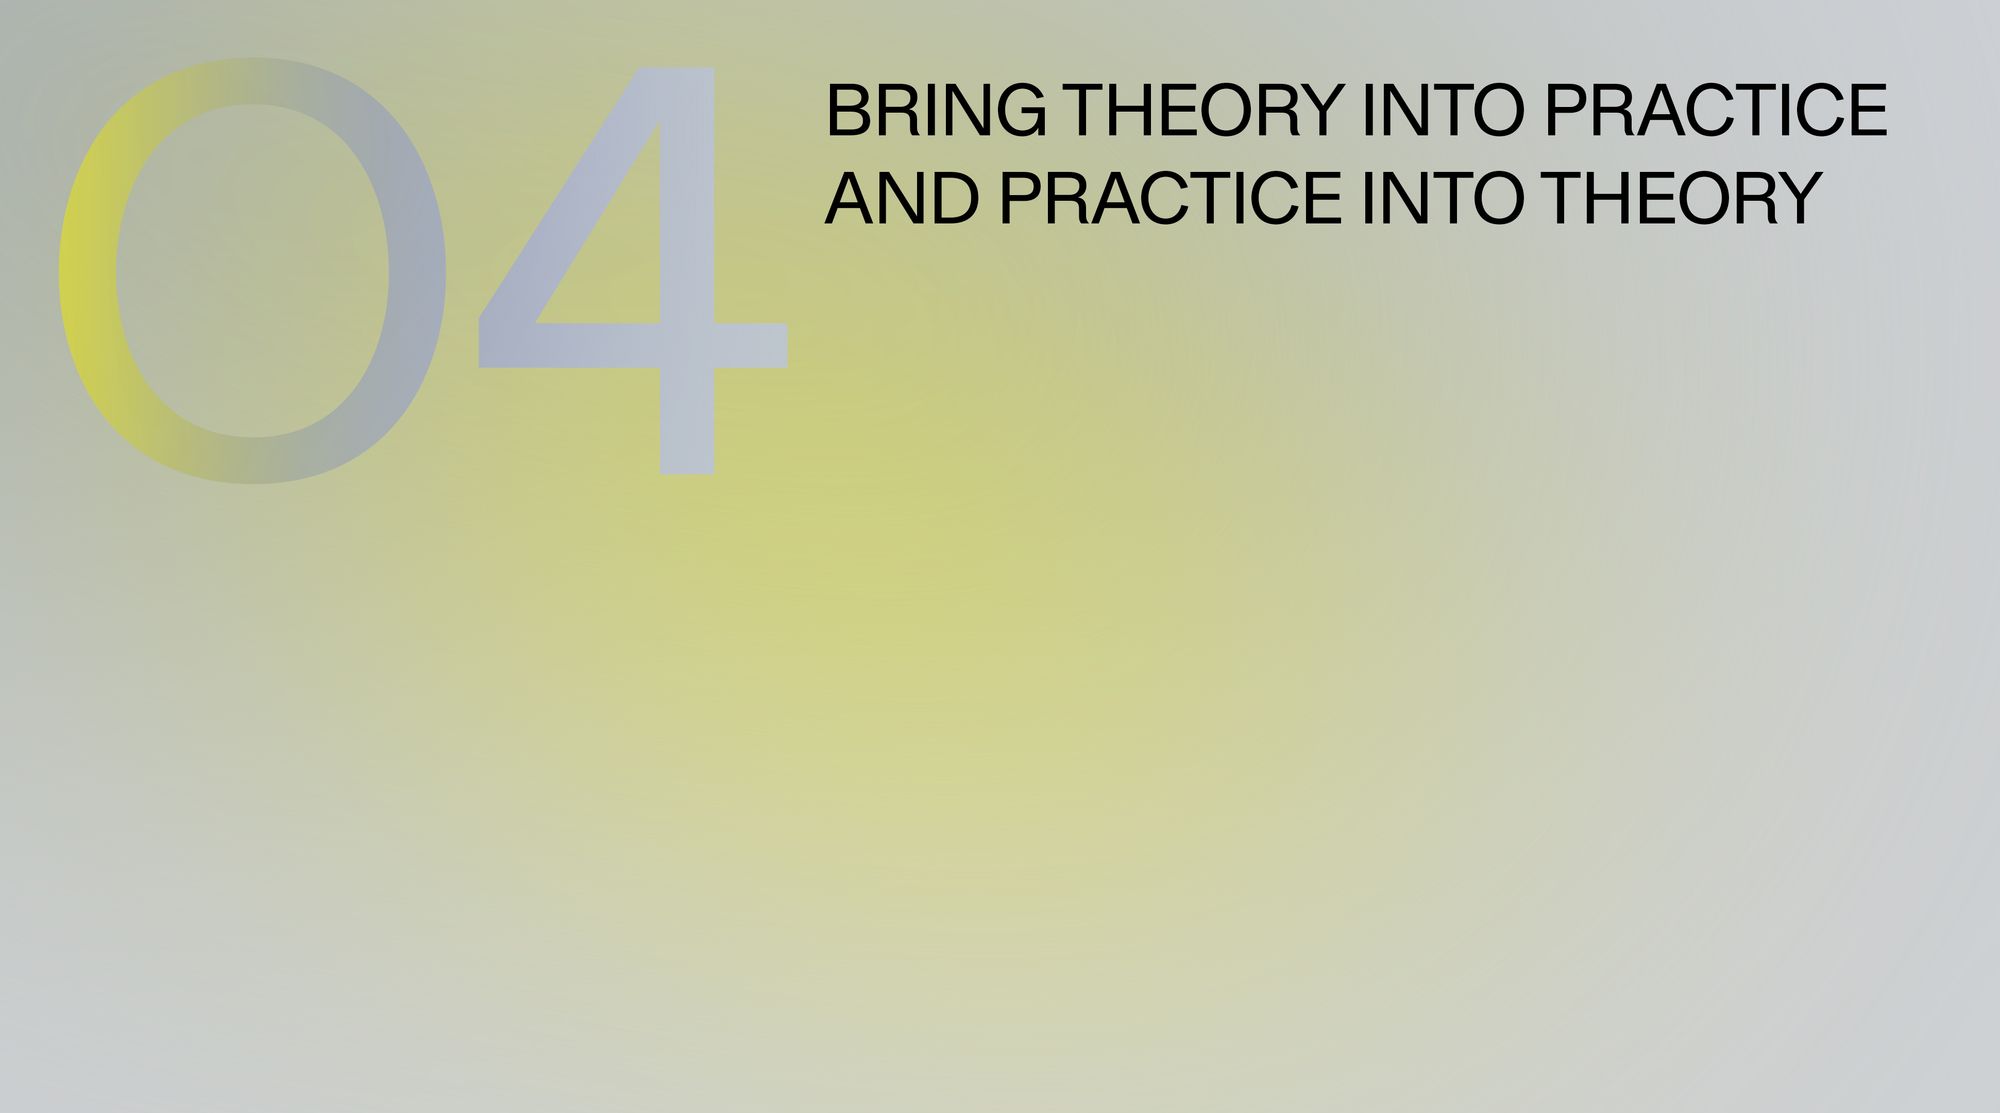 Bring theory into practice and practice into theory